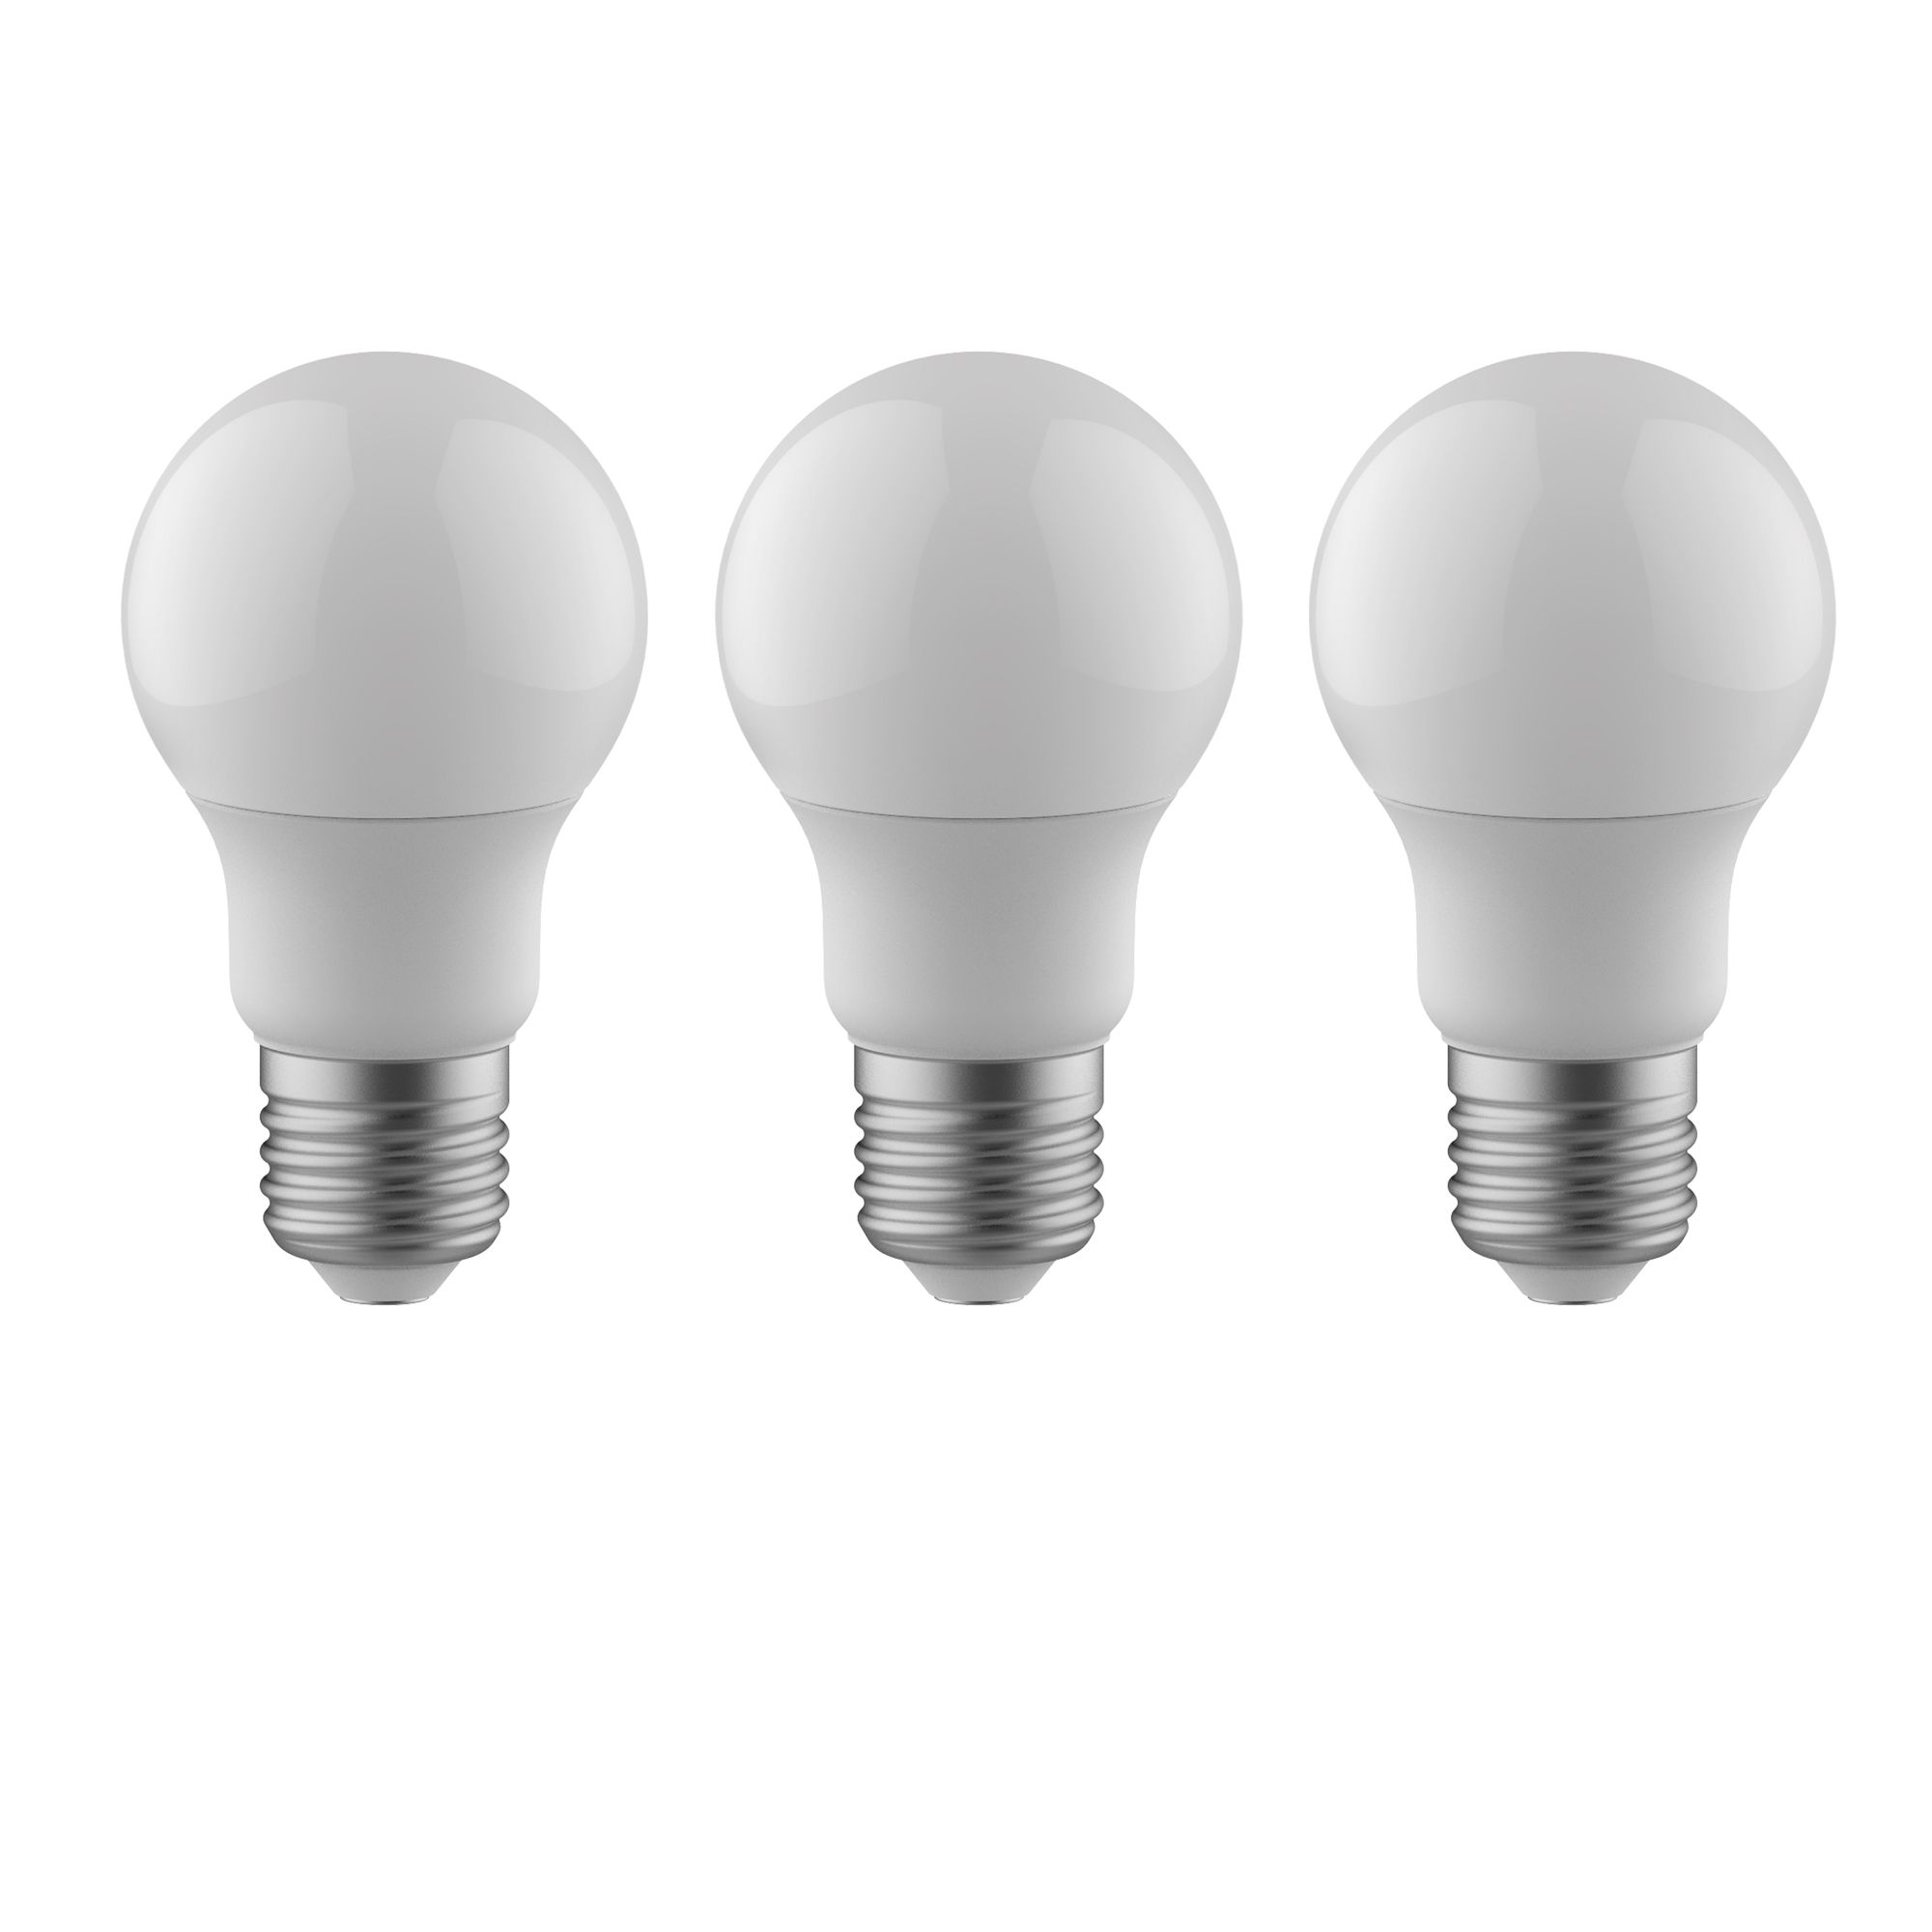 Diall E27 4.2W 470lm White A60 Warm white LED Light bulb, Pack of 3